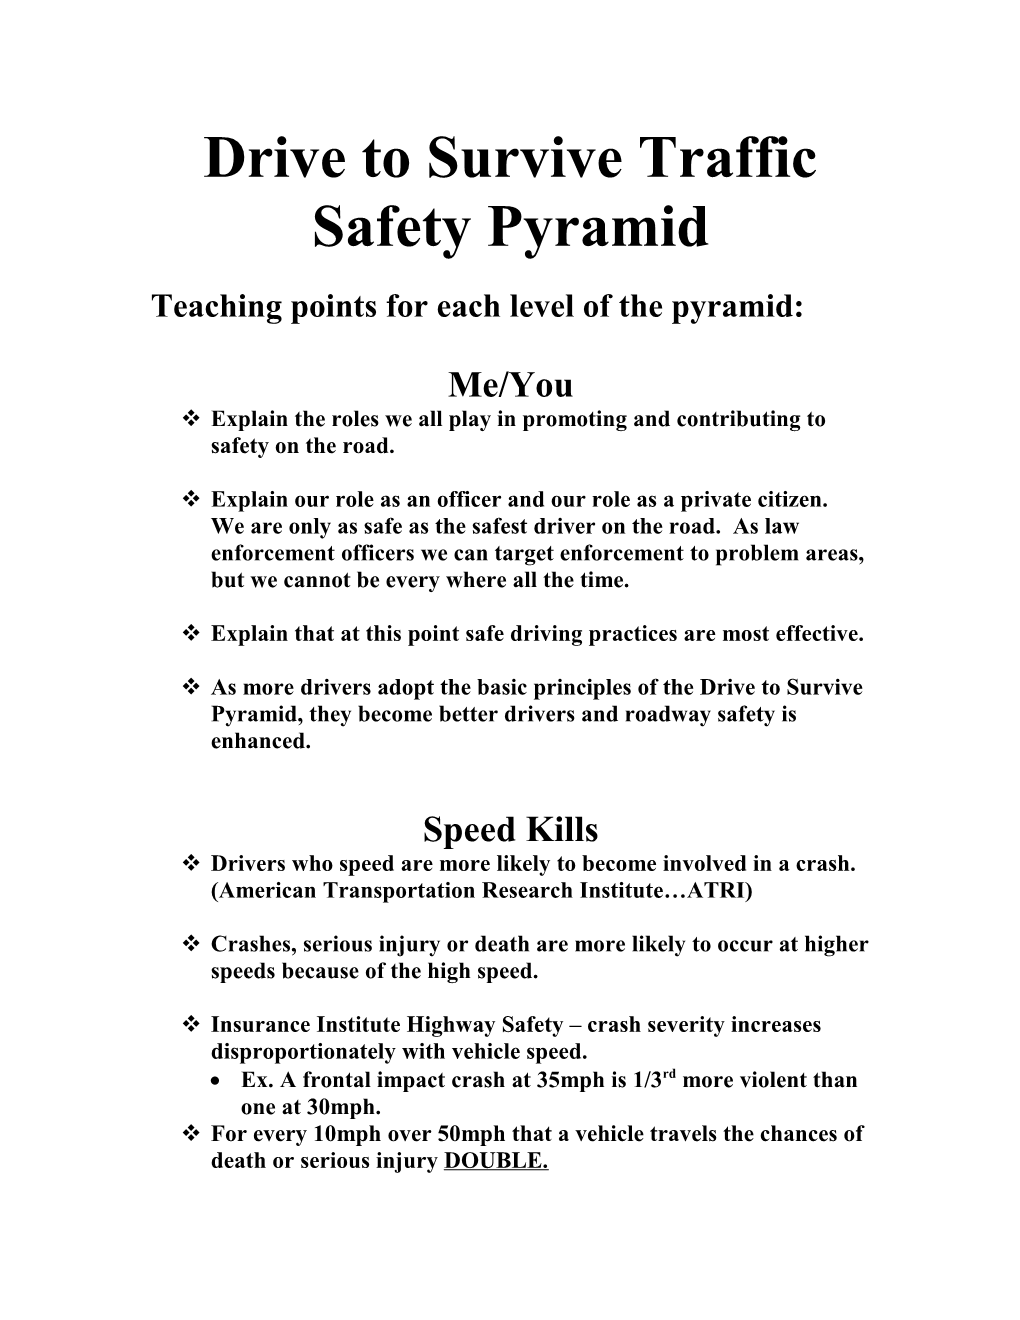 Drive to Survive Traffic Safety Pyramid